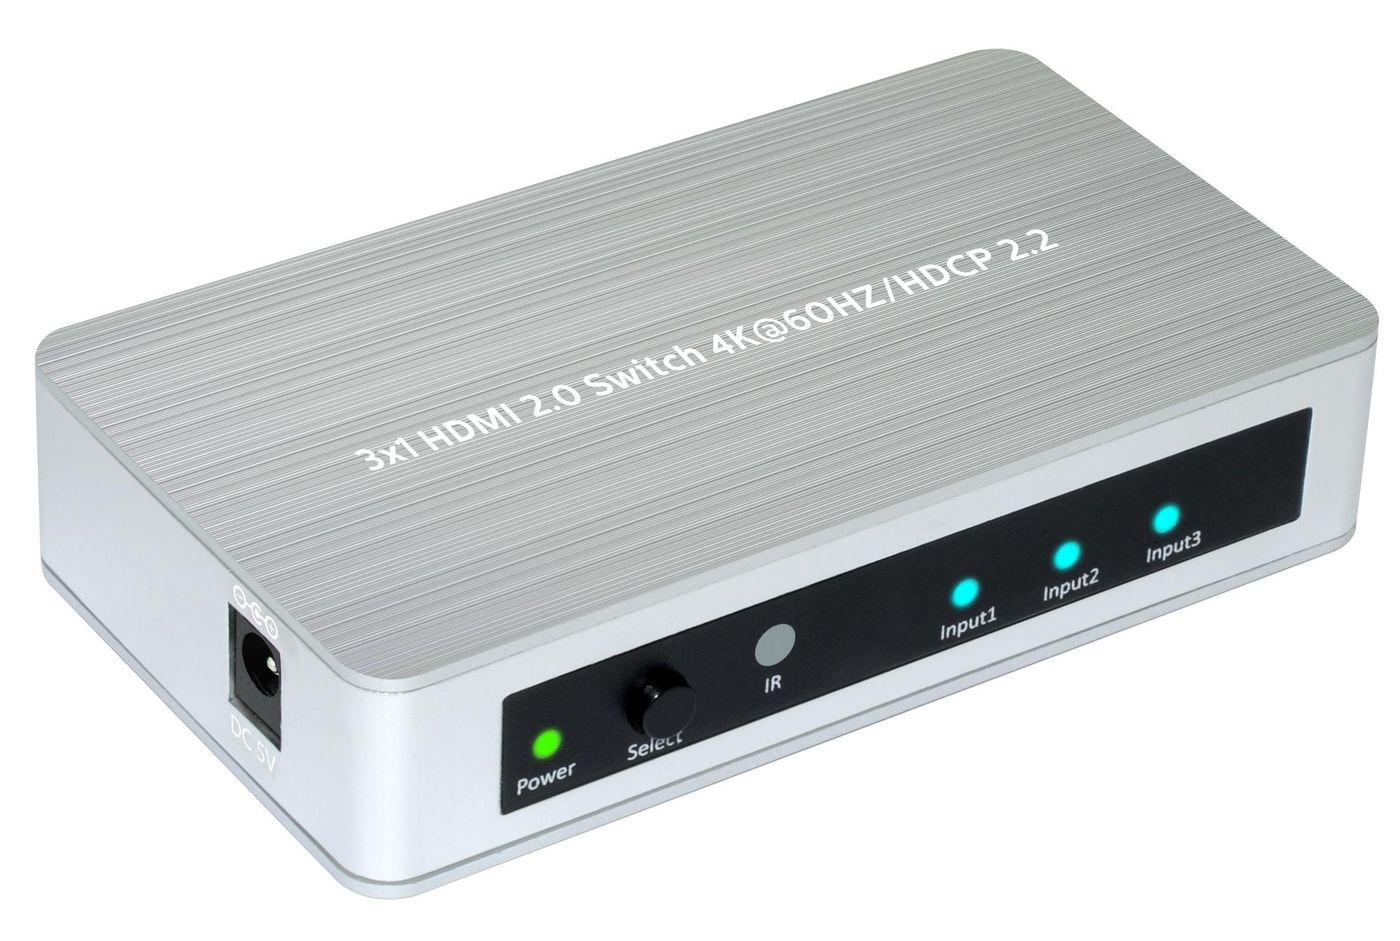 Hdmi 2.0 Switch 3 To 1 Way Supporting 4k 60hz / Hdcp2.2.